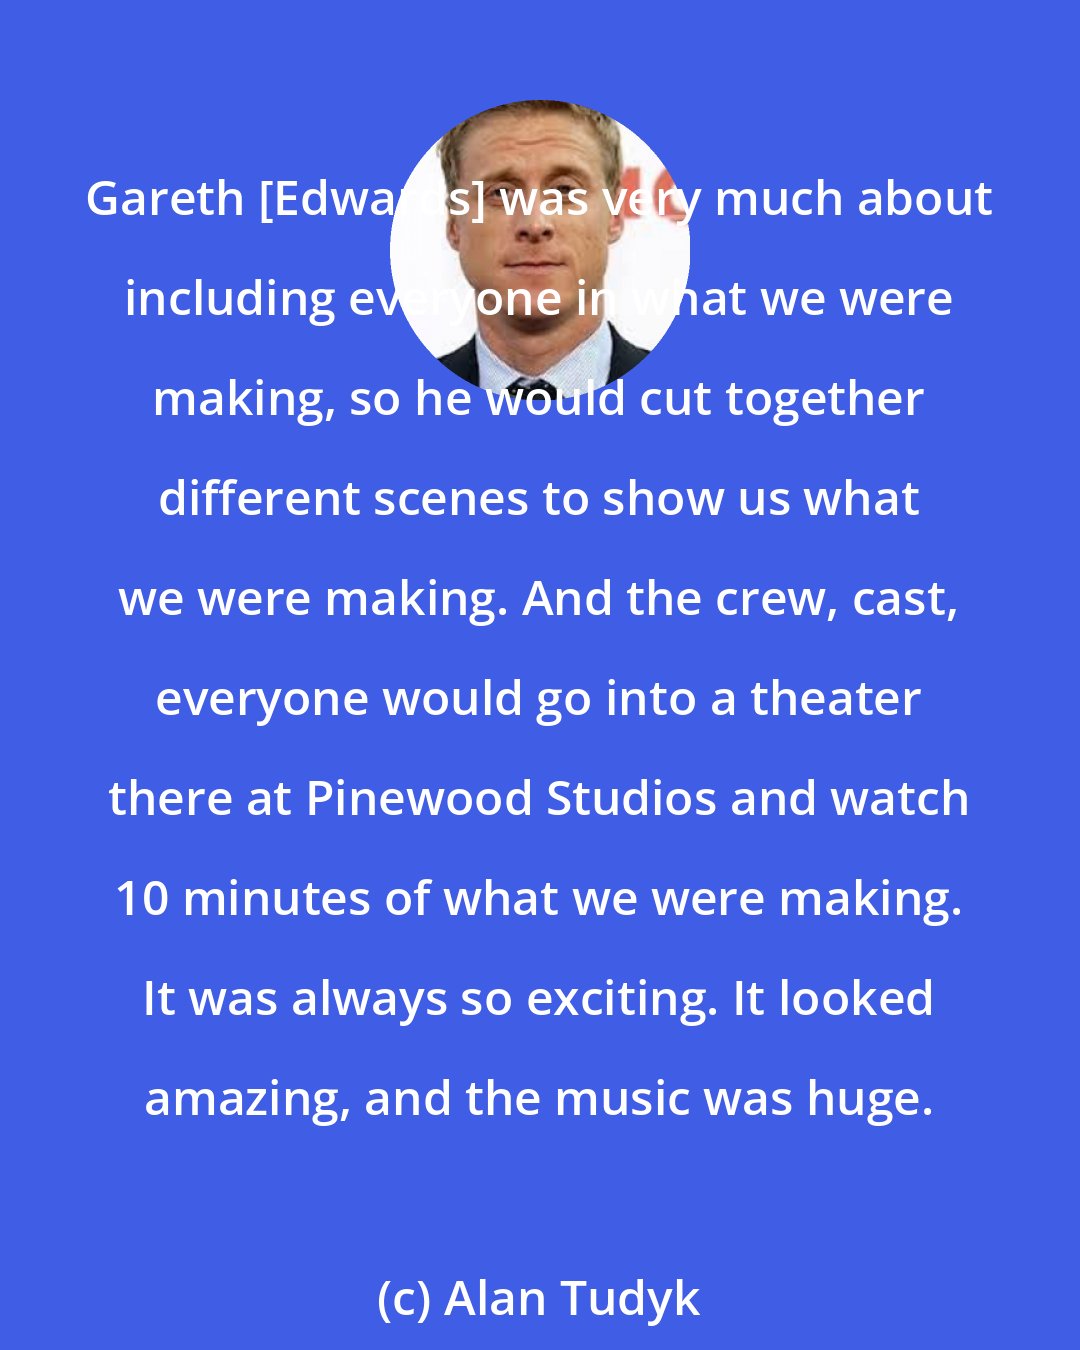 Alan Tudyk: Gareth [Edwards] was very much about including everyone in what we were making, so he would cut together different scenes to show us what we were making. And the crew, cast, everyone would go into a theater there at Pinewood Studios and watch 10 minutes of what we were making. It was always so exciting. It looked amazing, and the music was huge.